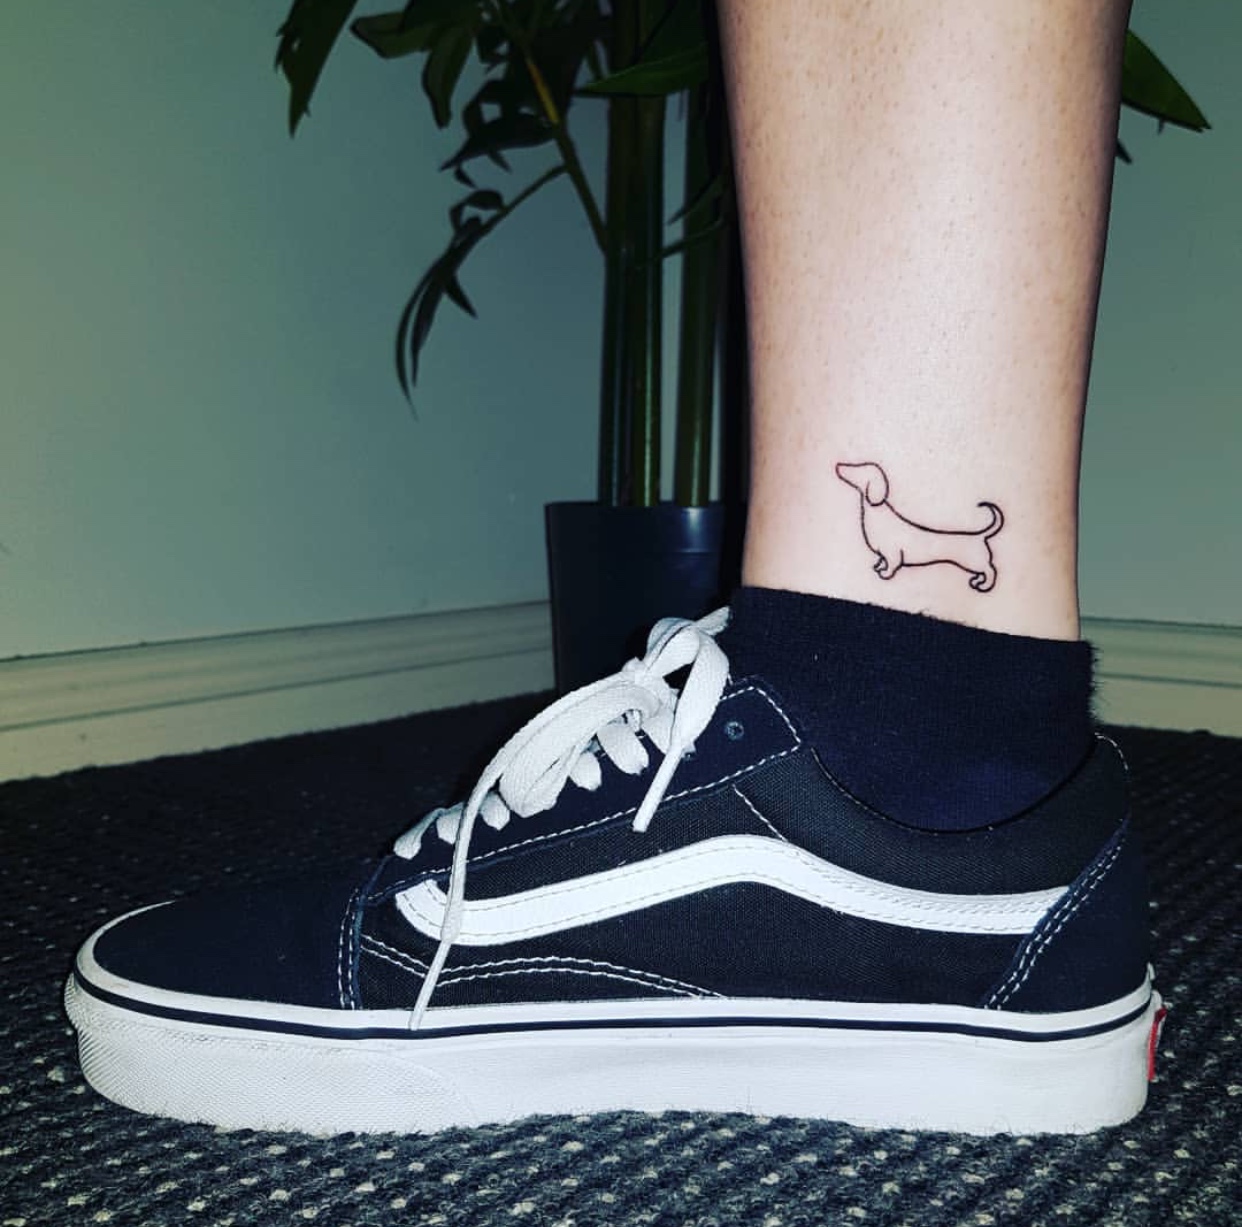 minimalist outline of Dachshund tattoo on the side of lower leg